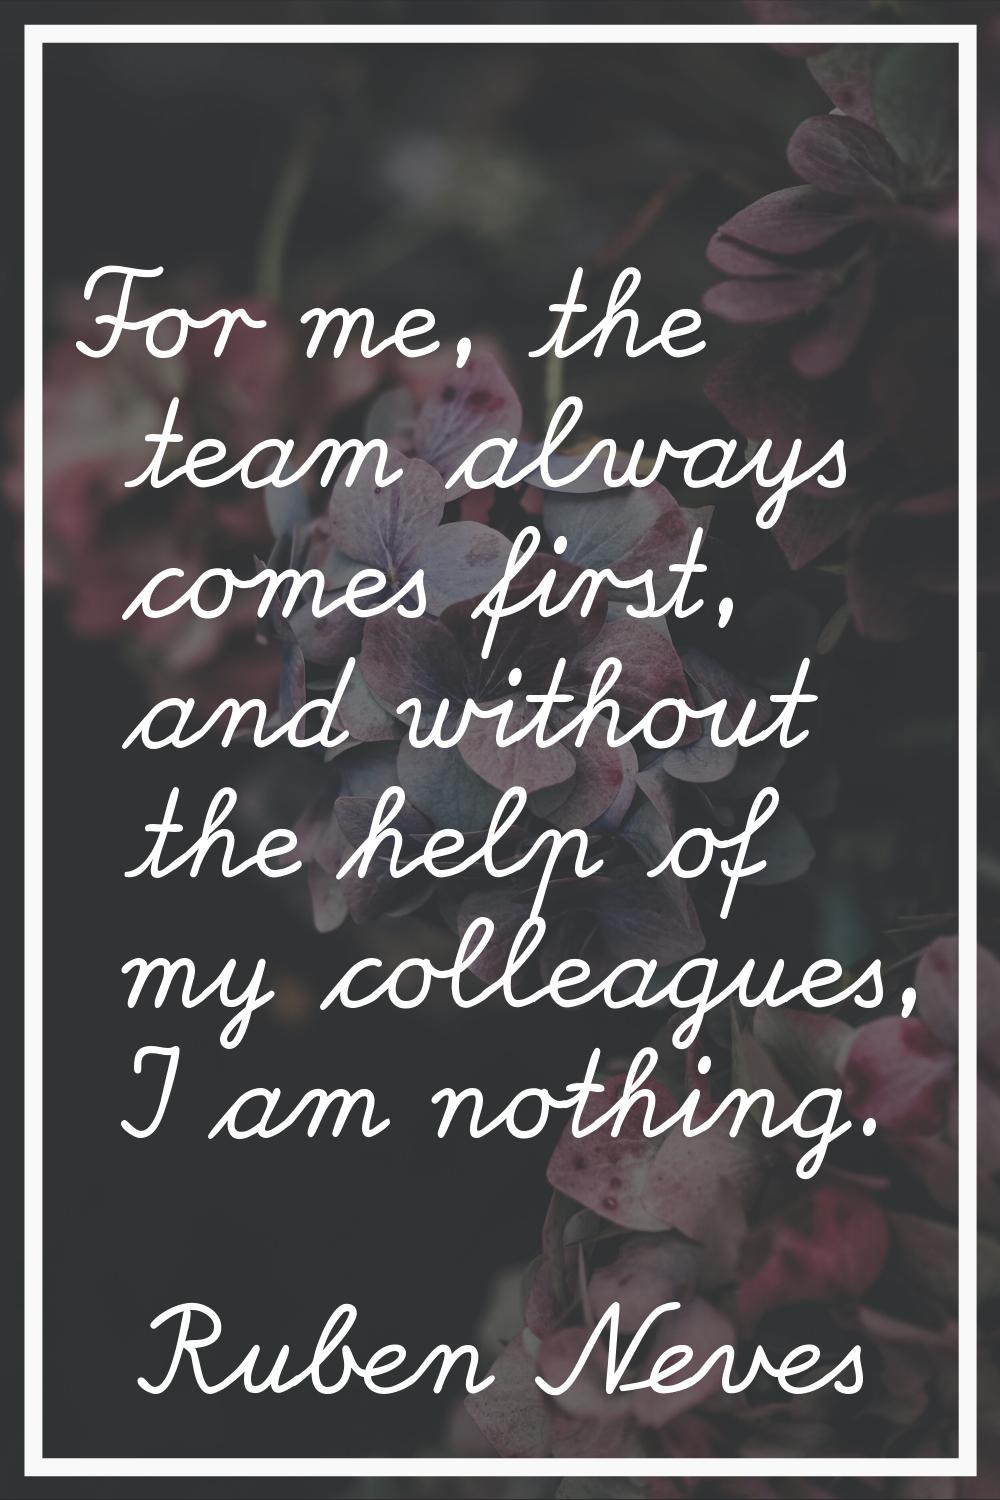 For me, the team always comes first, and without the help of my colleagues, I am nothing.